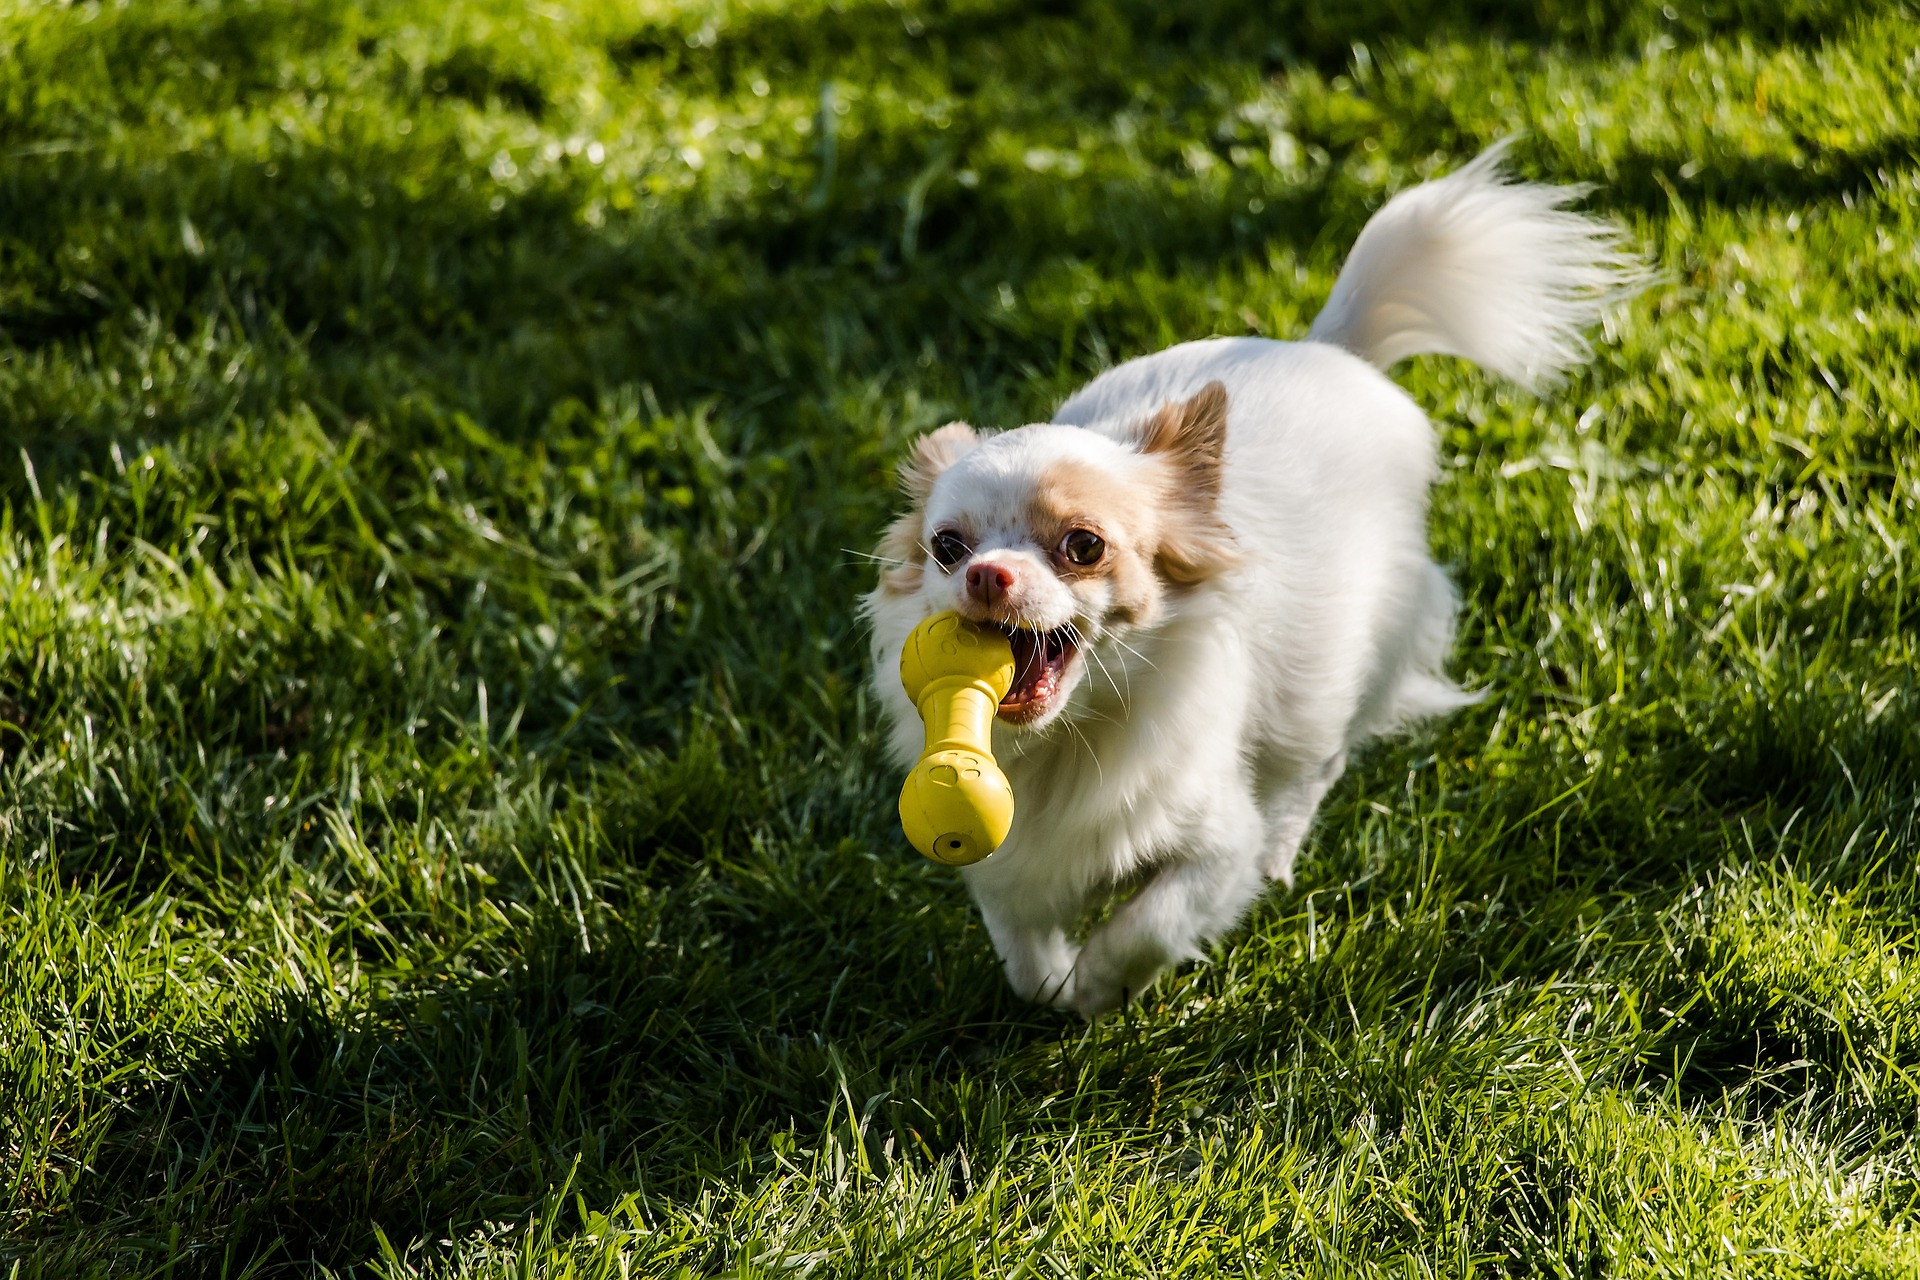 Importance and types of dog toys for mental stimulation